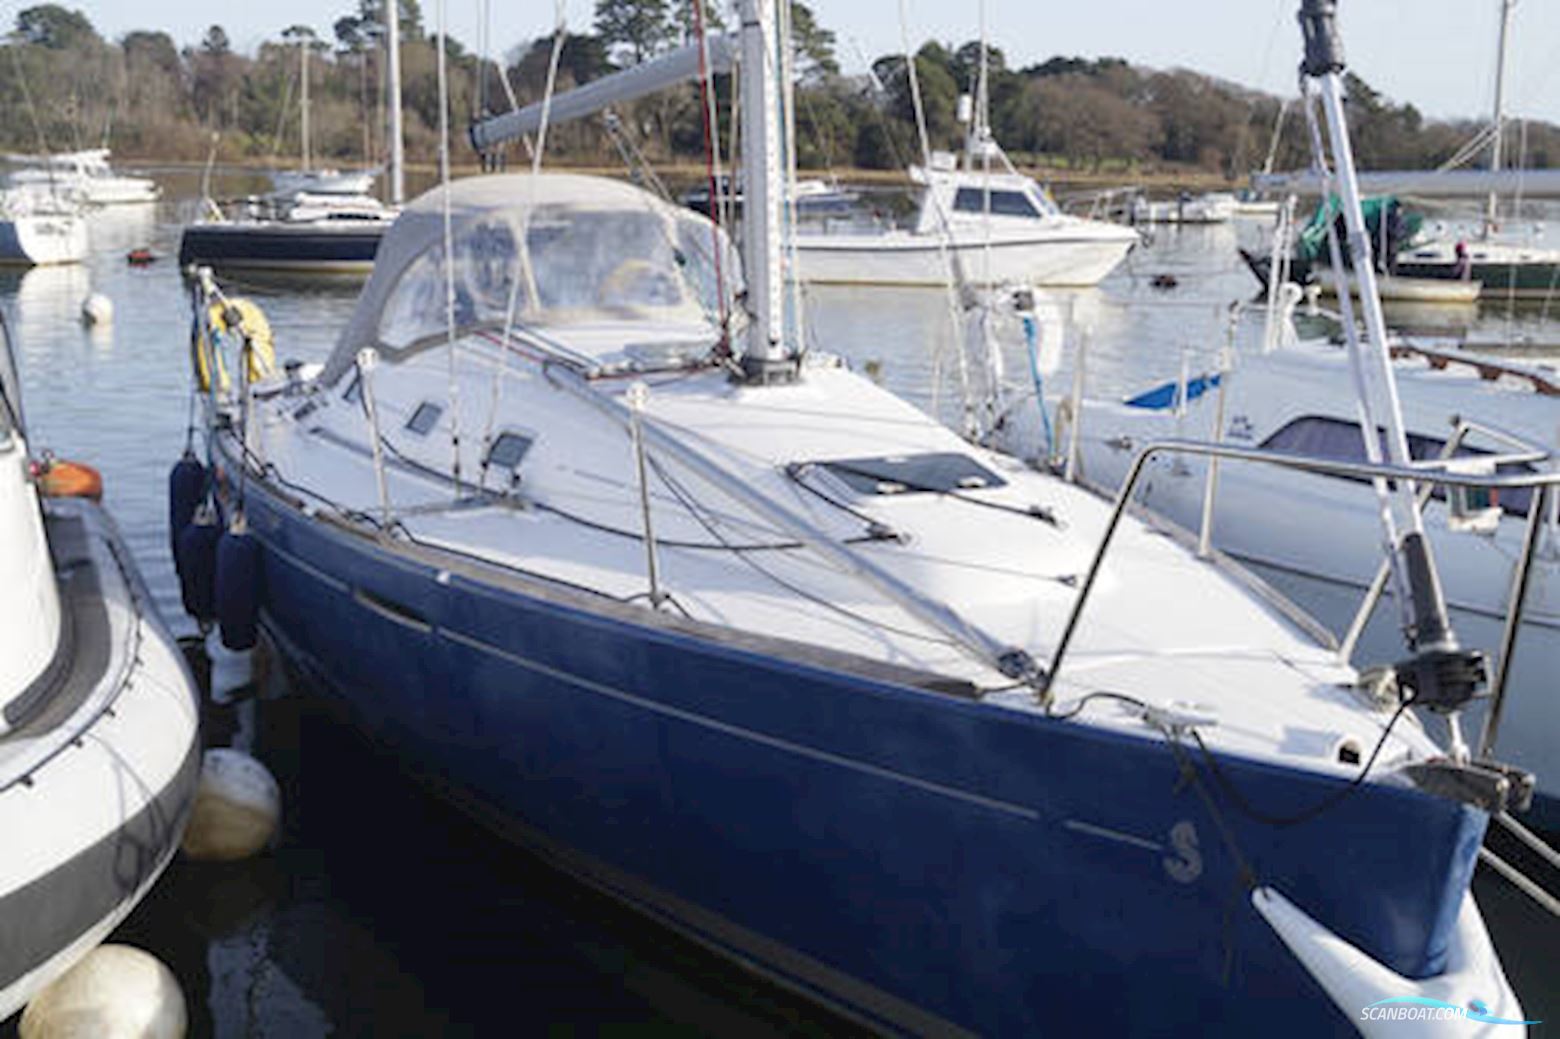 Beneteau First 31.7 Sailing boat 2001, with Volvo 2020 engine, United Kingdom